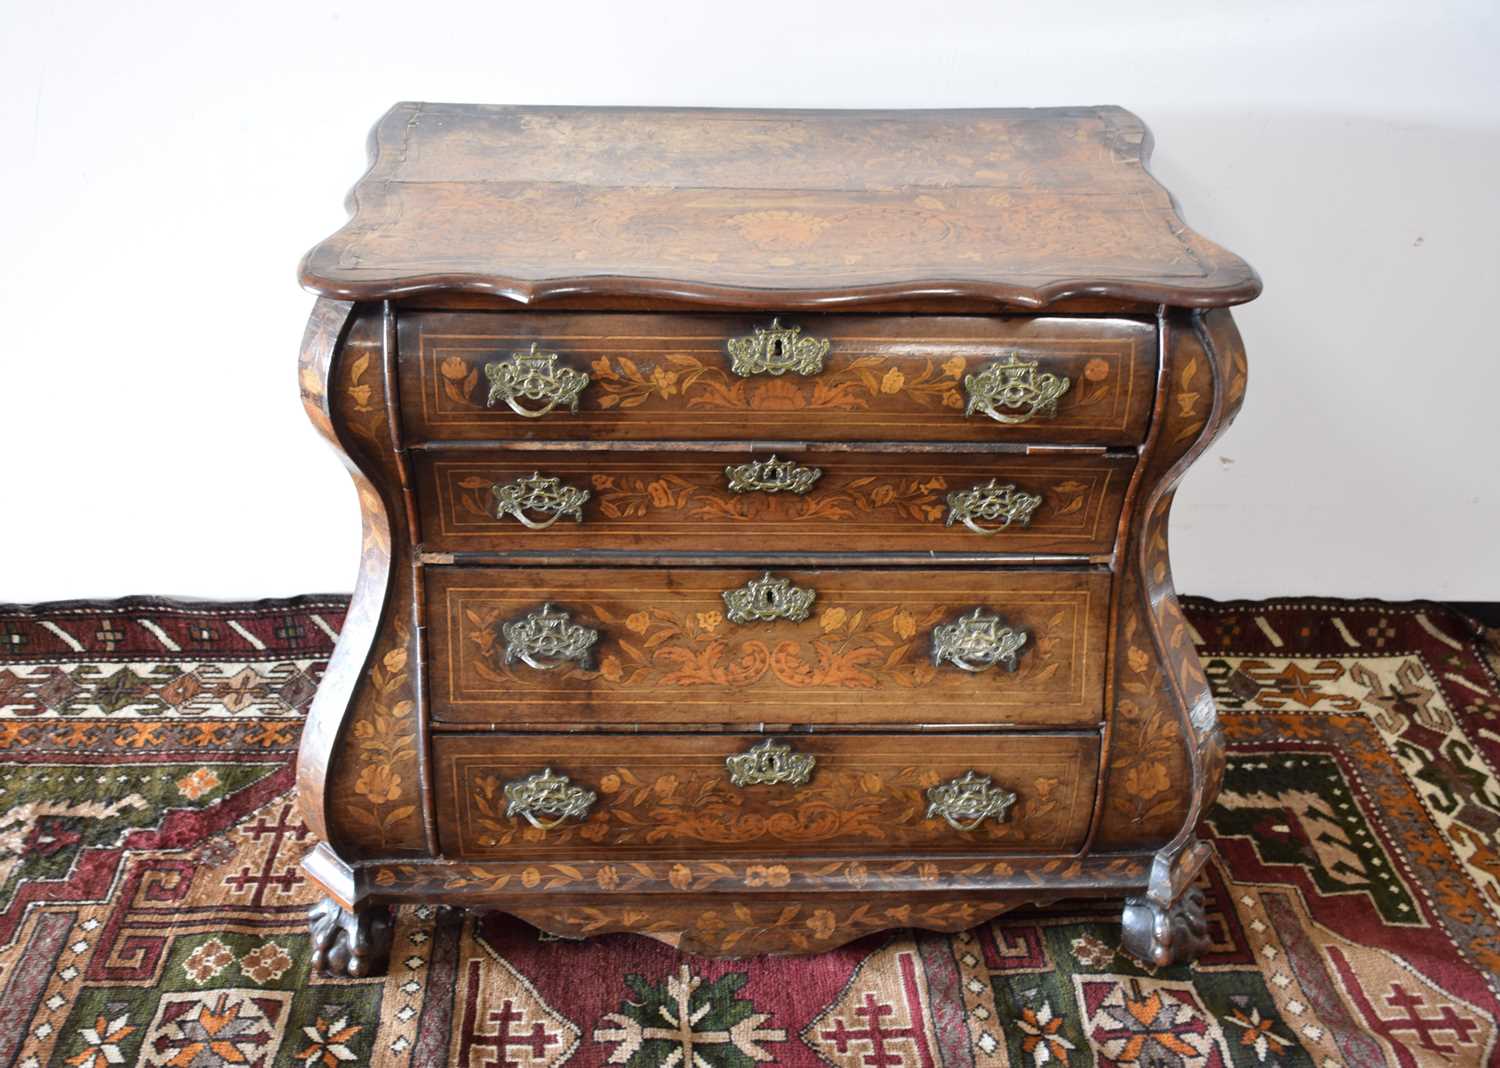 Lot 125 - A late 18th or early 19th century Dutch marquetry chest of drawers